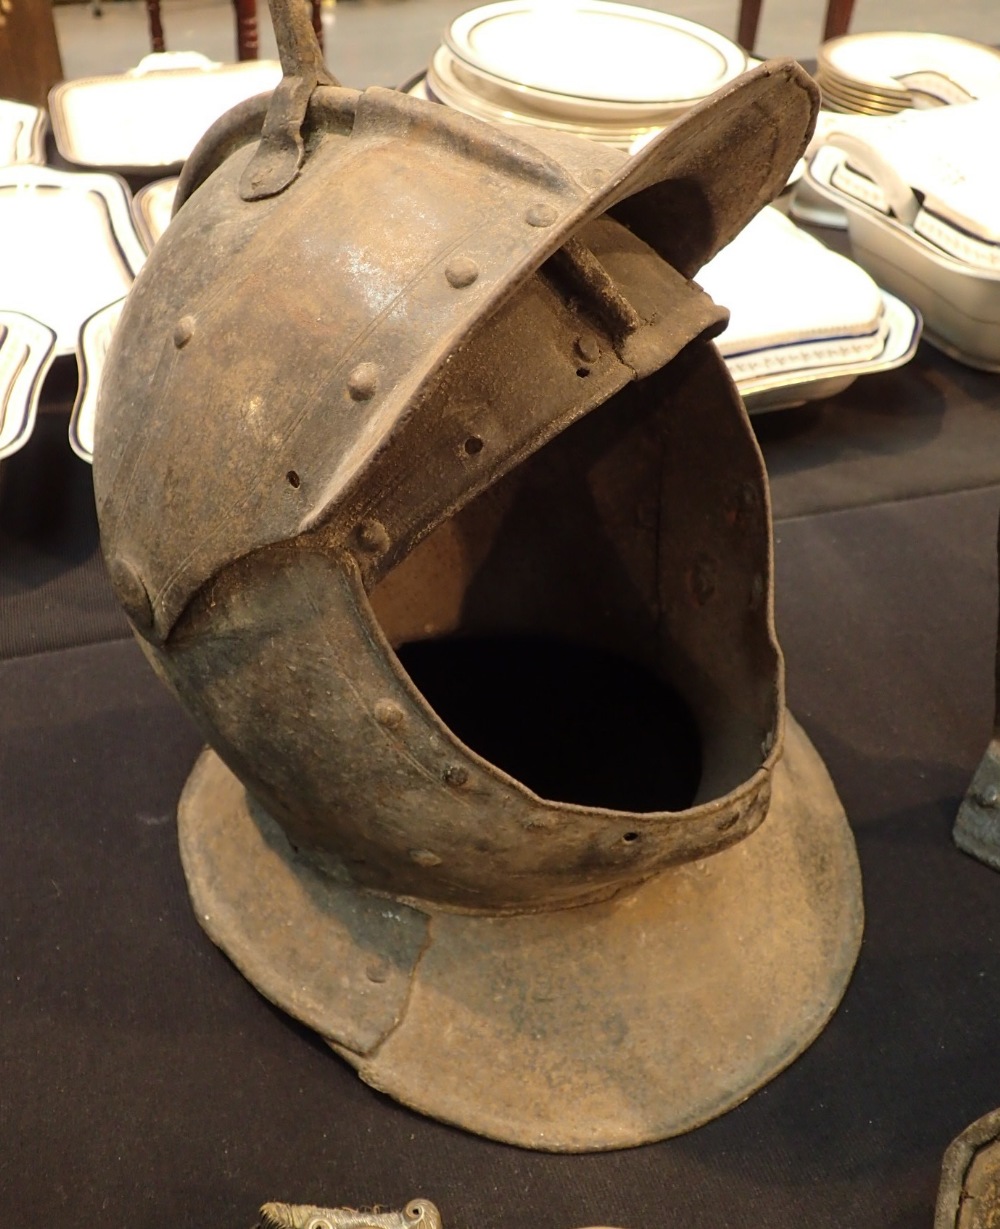 English Civil War style Cavalry helmet with spike and peak possibly a Victorian reproduction